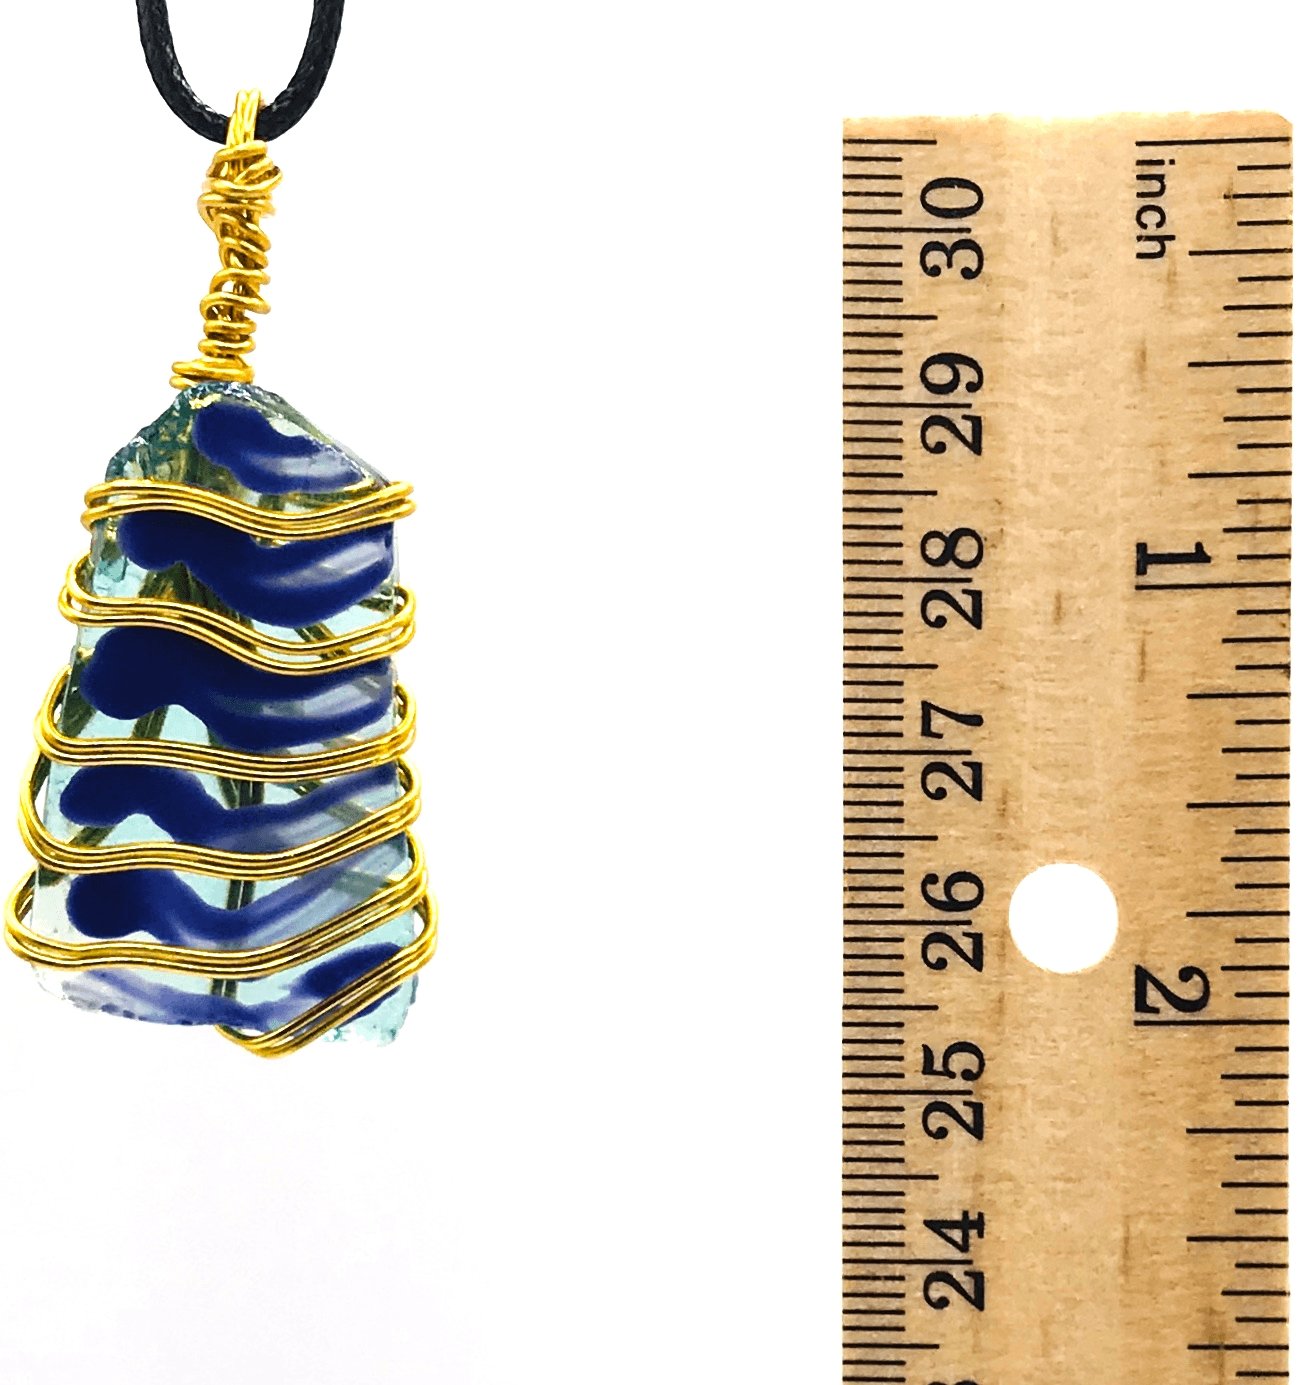 Hand Painted Limited Edition Sea Glass Ice Blue Purple Gold Medium 1 1/2-2 inch Pendant - Sunshine & Goldie